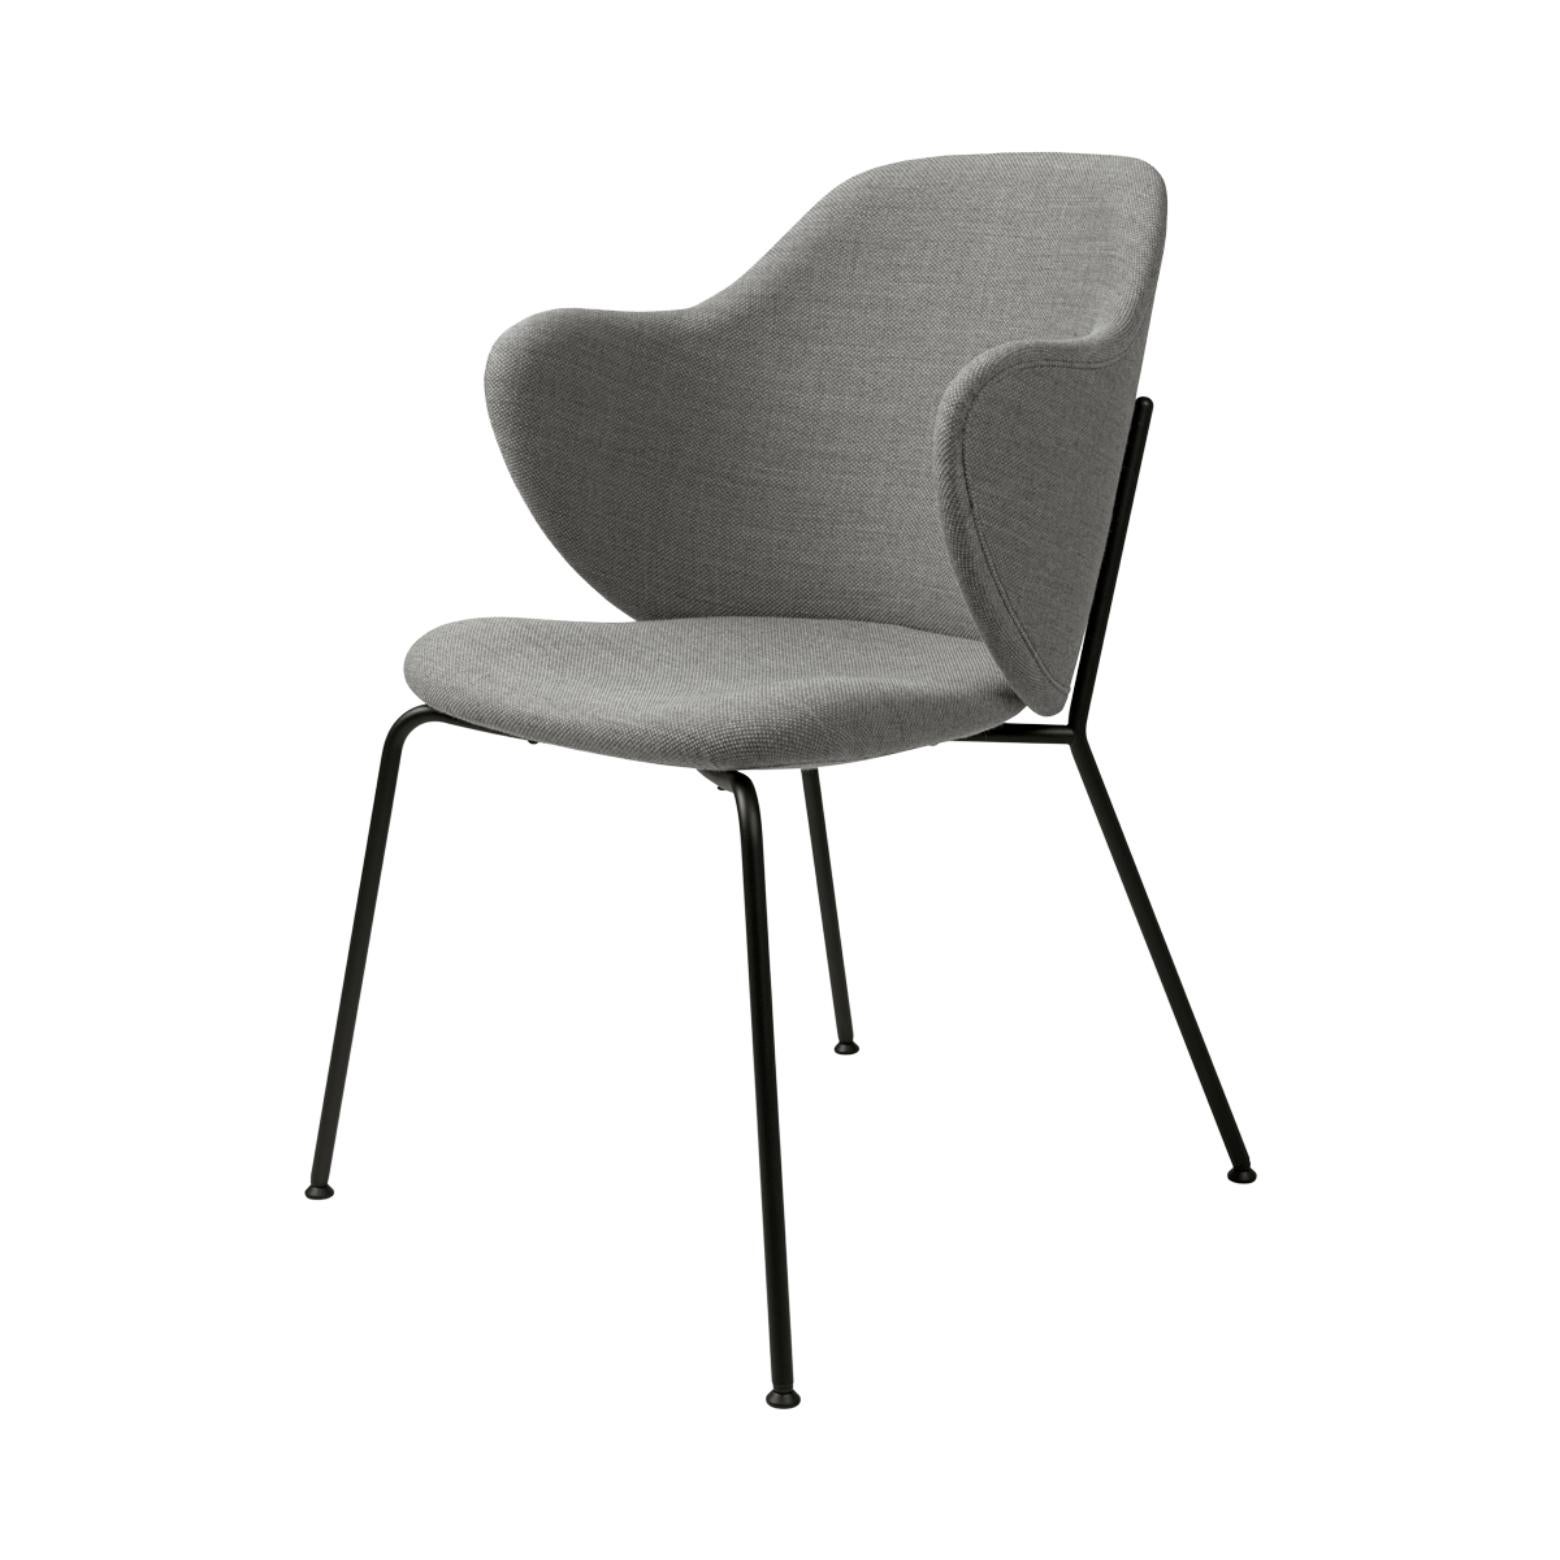 Grey Fiord Lassen chair by Lassen
Dimensions: W 58 x D 60 x H 88 cm 
Materials: Textile

The Lassen chair by Flemming Lassen, Magnus Sangild and Marianne Viktor was launched in 2018 as an ode to Flemming Lassen’s uncompromising approach and